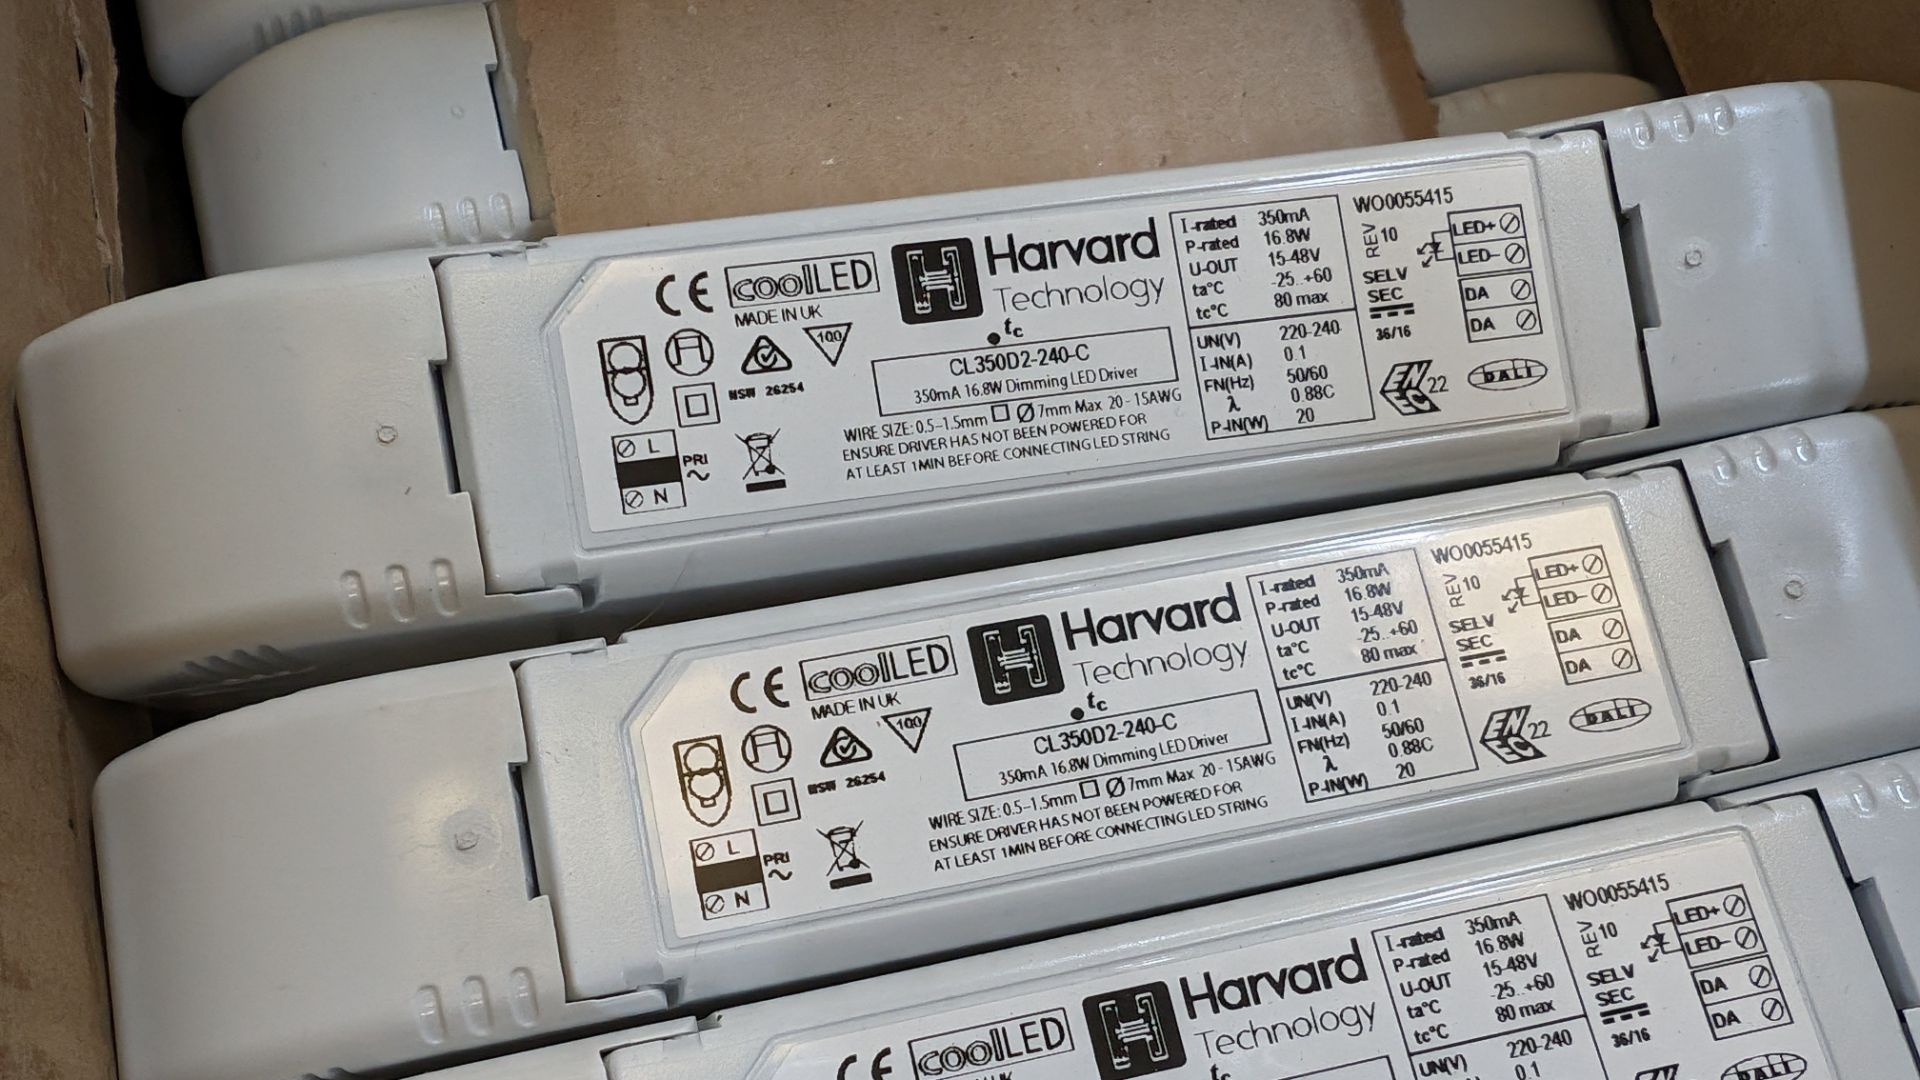 87 off Harvard 16.8w dimming LED drivers - Image 4 of 4